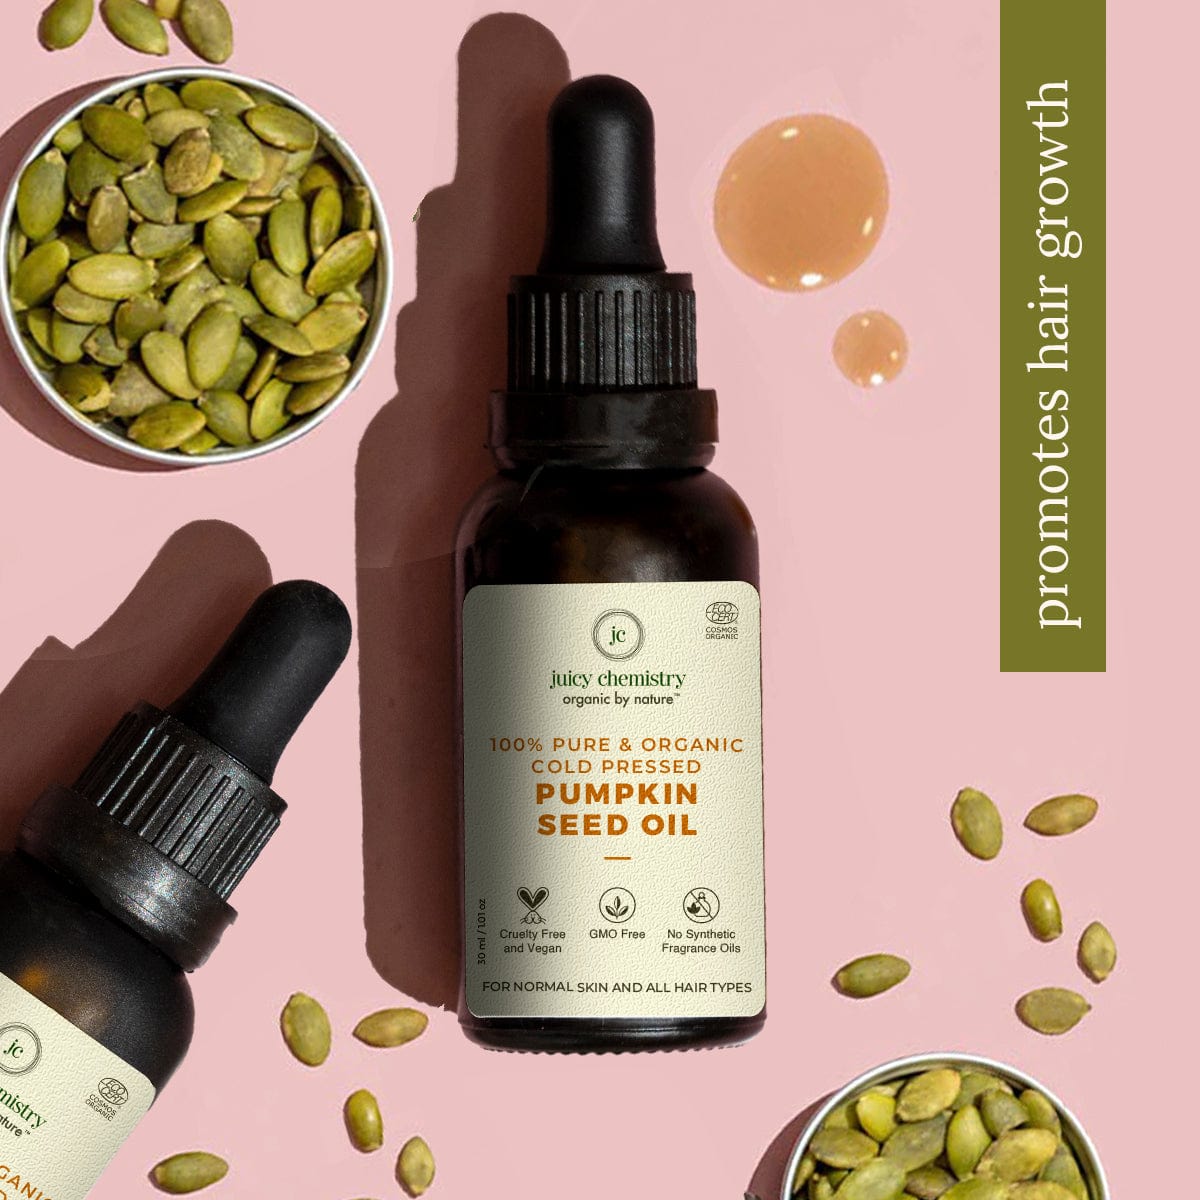 Cold Pressed Pumpkin Seed Carrier Oil